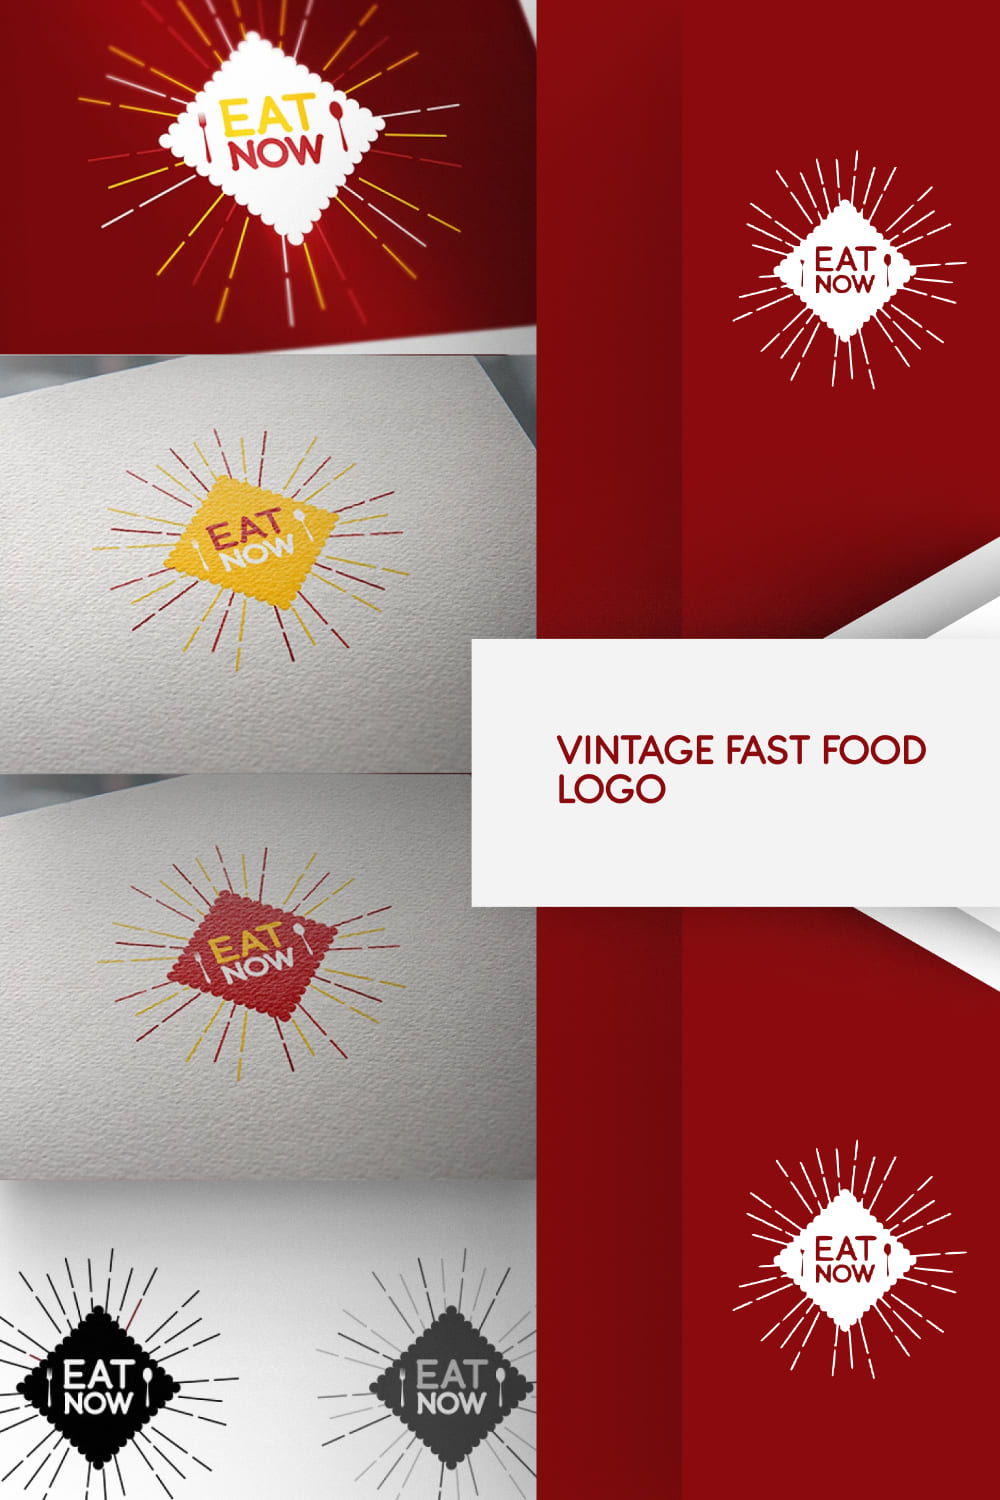 Light and modern logos for food business.